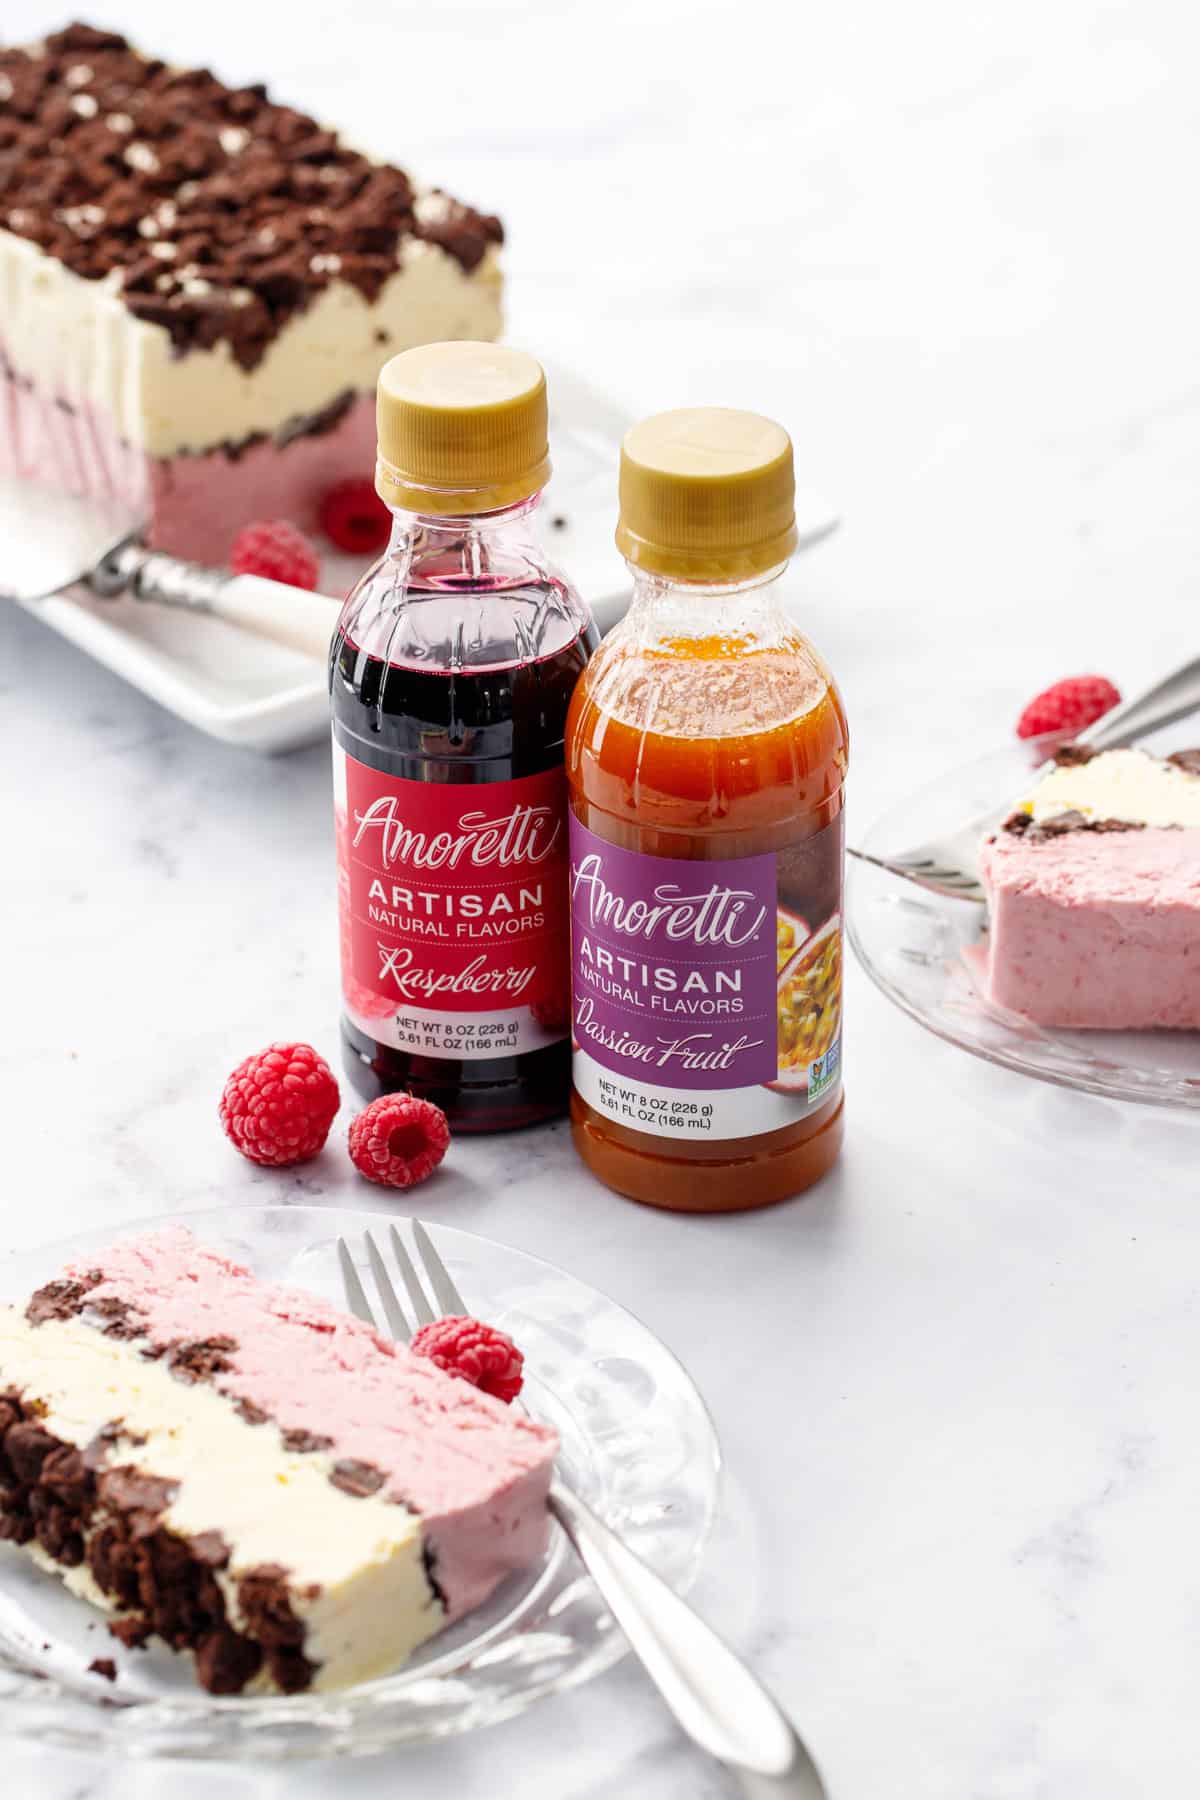 Two bottles of Amoretti Artisan flavors, Passionfruit and Raspberry, along with a few plates with slices of raspberry passionfruit semifreddo, and the rest of the frozen loaf in the background.